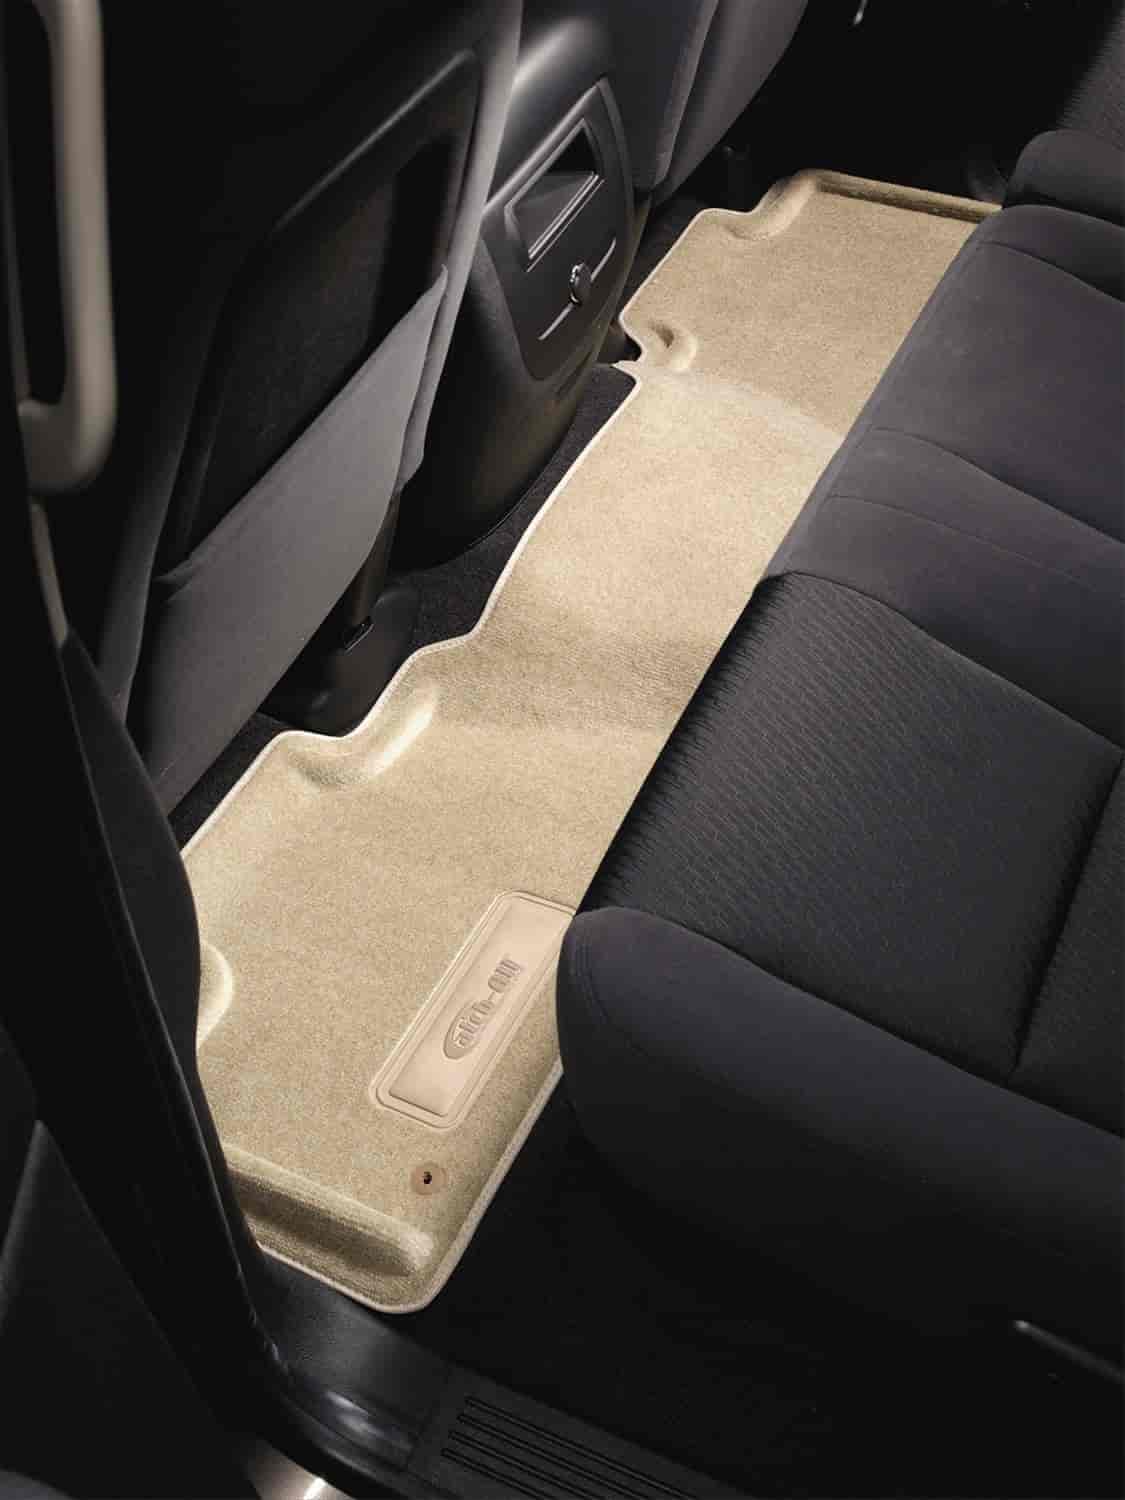 CATCH-ALL SECOND ROW FLOOR COVERINGS